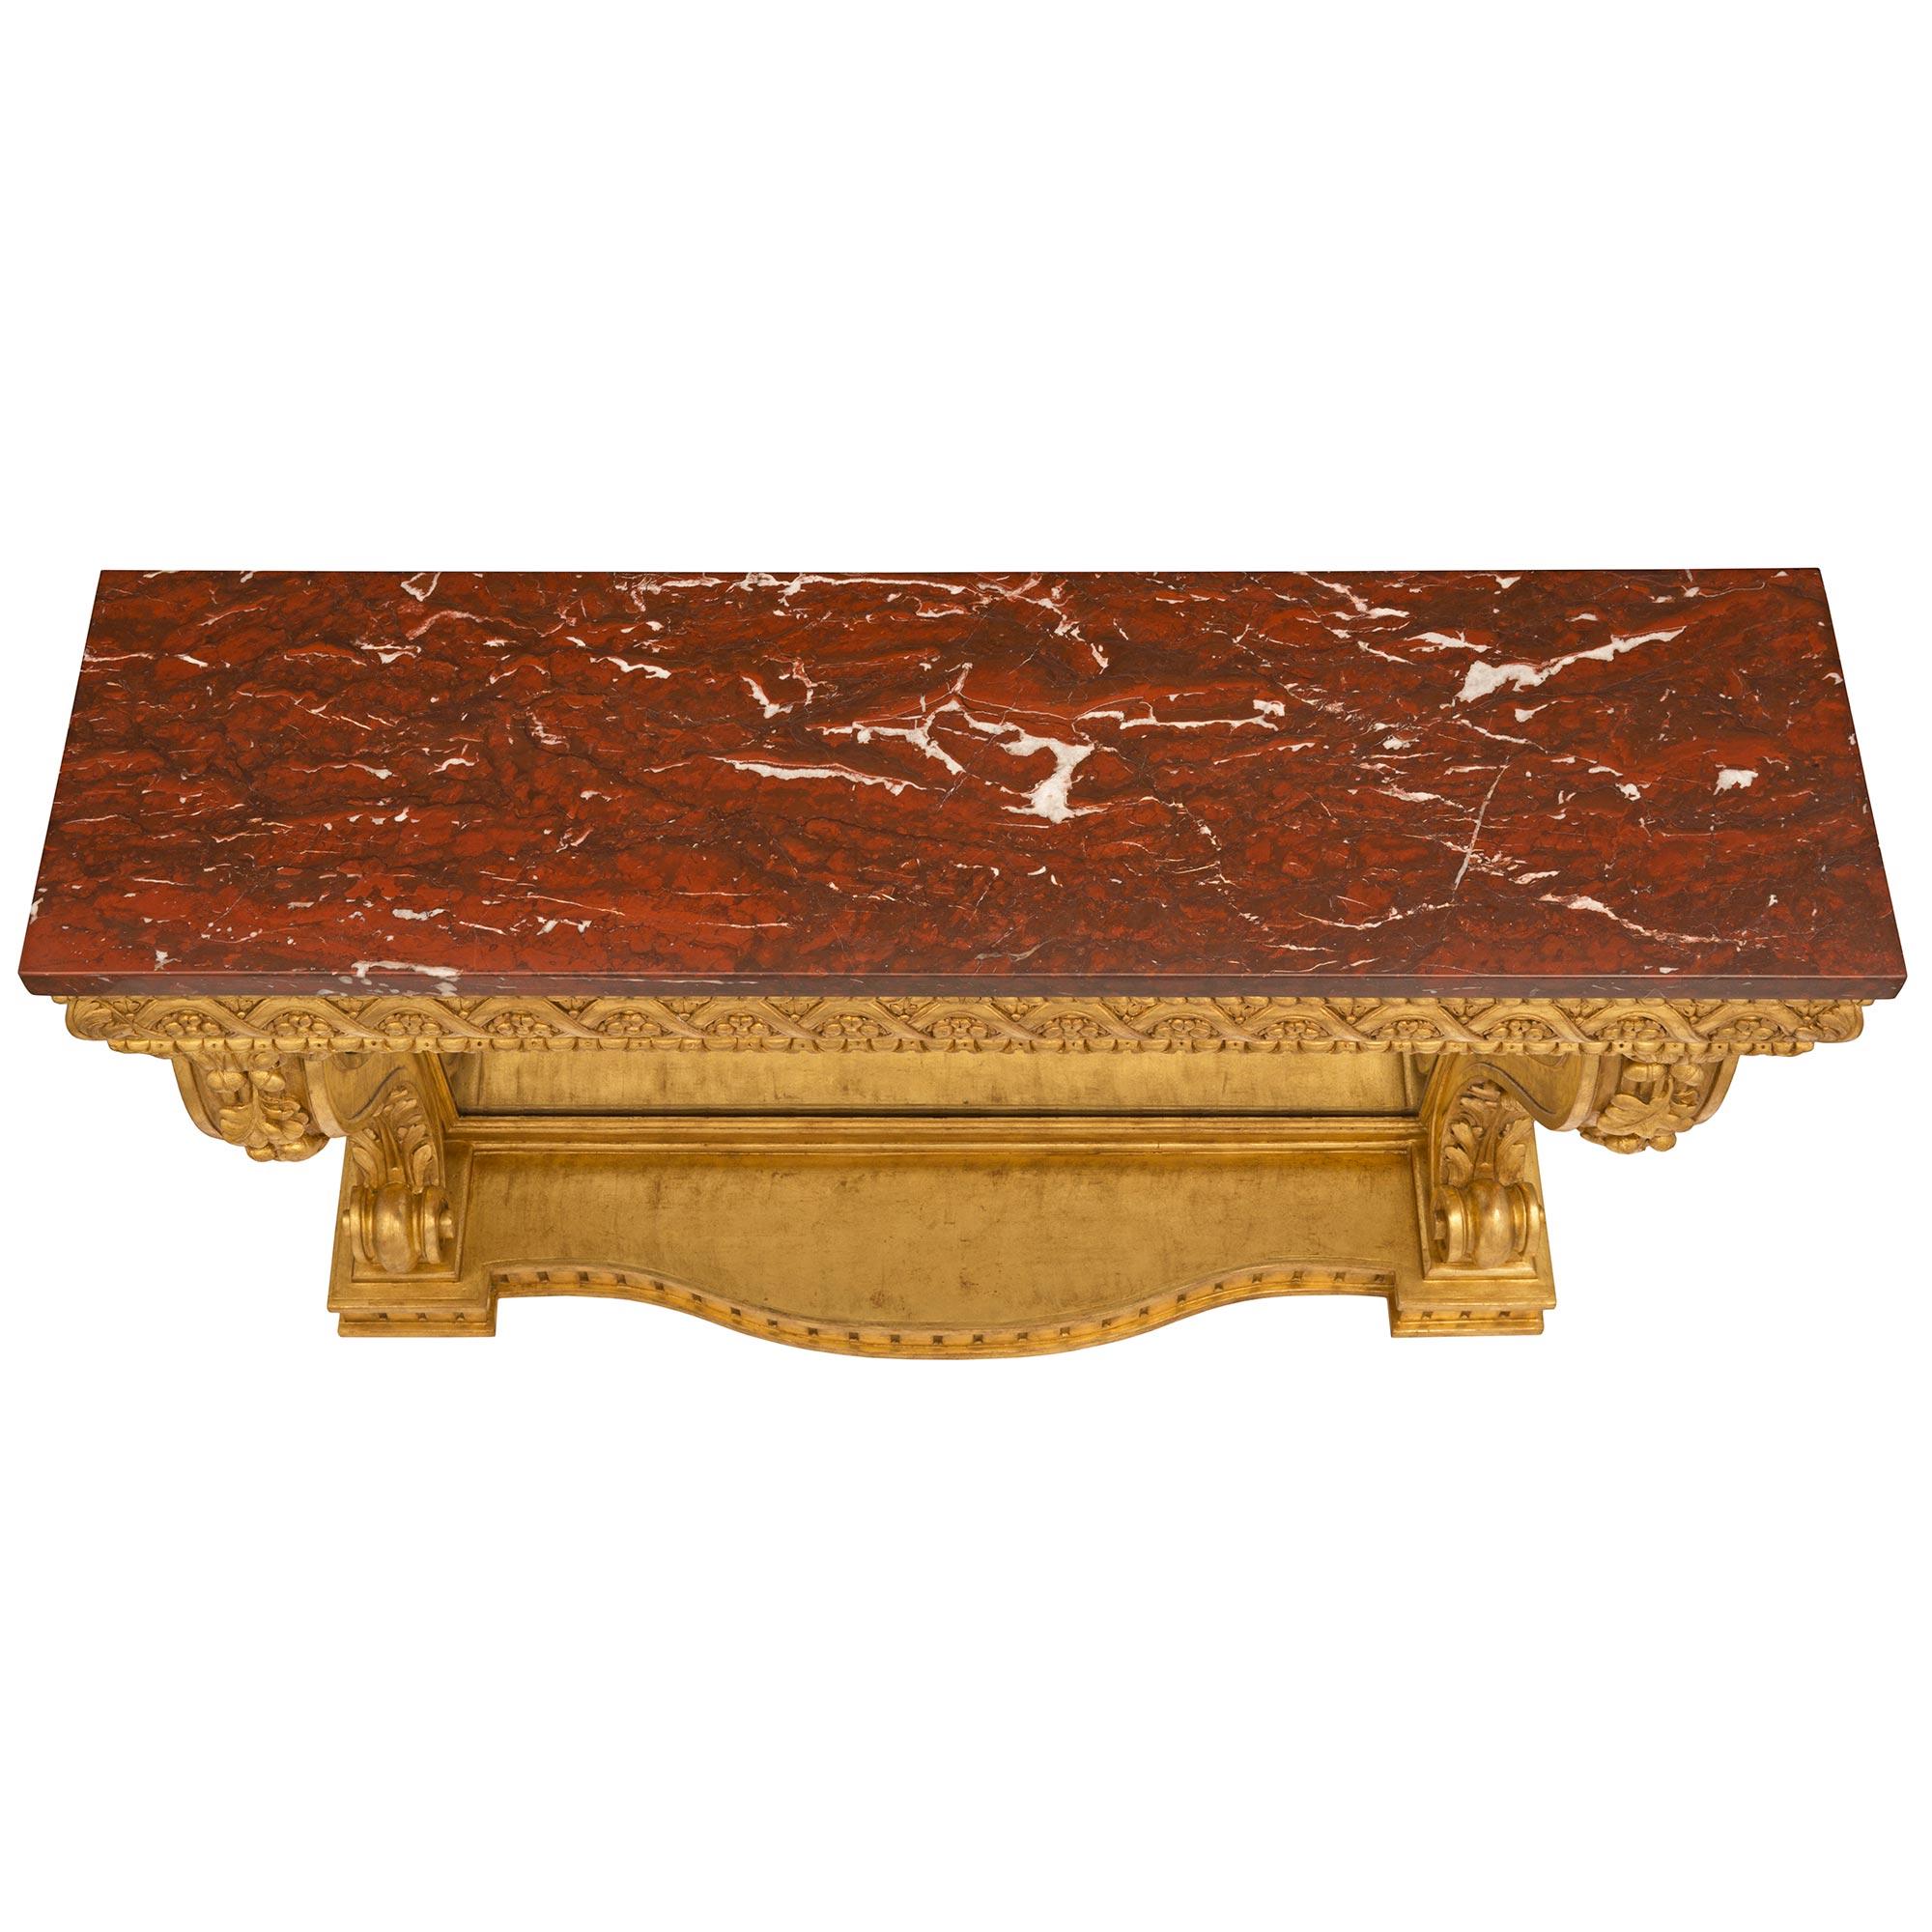 A stunning and extremely elegant French 19th century Louis XVI st. Belle Époque period giltwood and Rouge Griotte marble console. The uniquely scaled freestanding console is raised by a superb bottom tier with a beautiful scalloped movement and fine